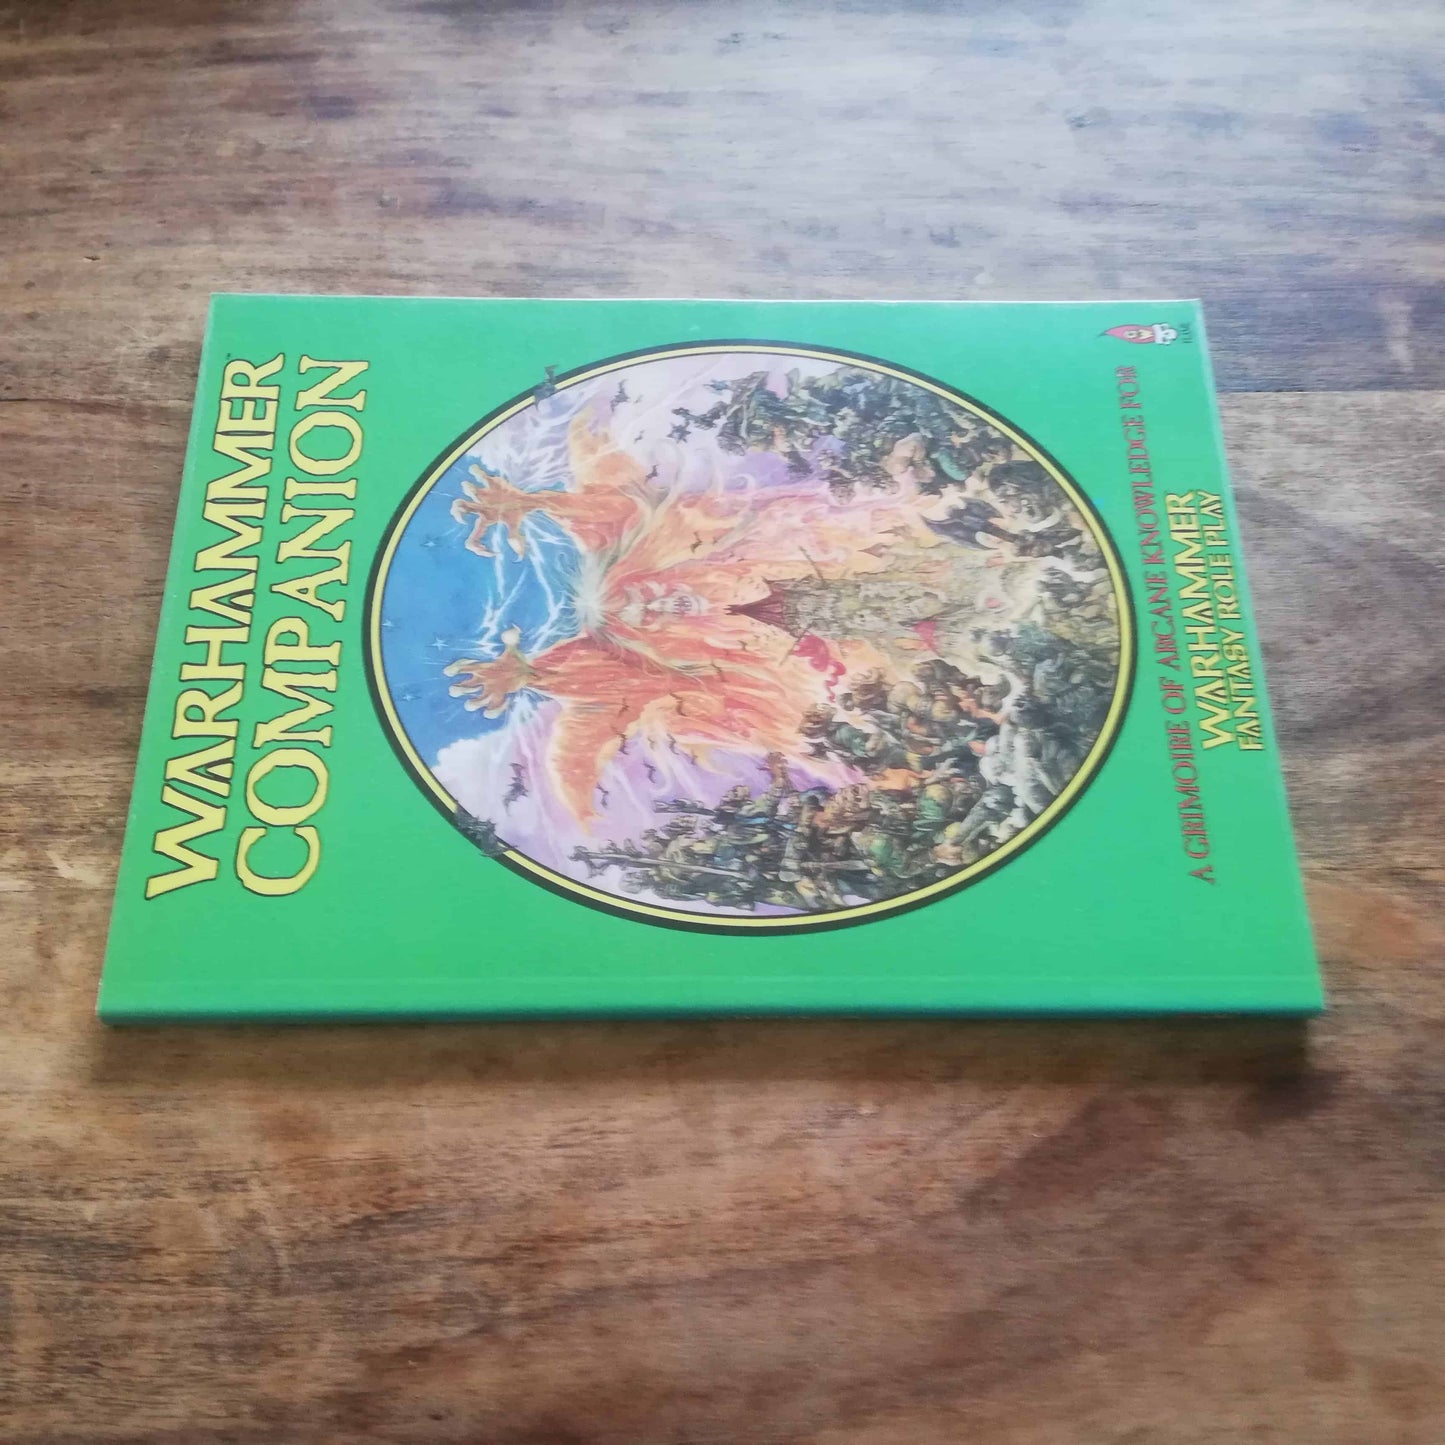 WFRP COMPANION WARHAMMER FANTASY ROLEPLAY GRIMOIRE - 1990 SOURCEBOOK 1ST EDITION - AllRoleplaying.com